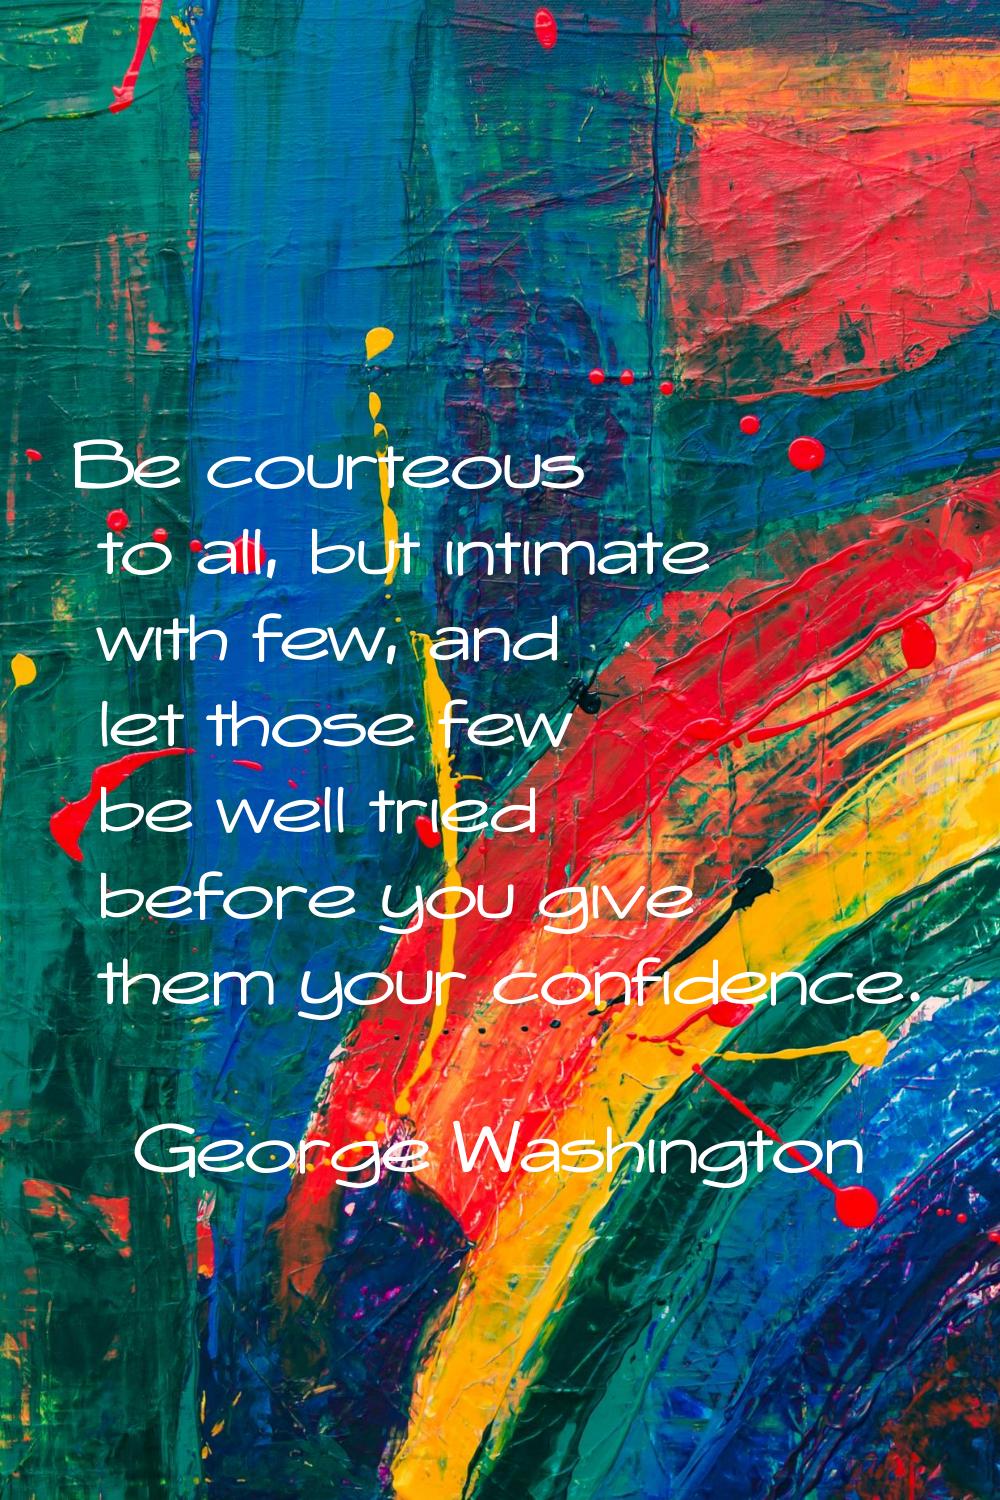 Be courteous to all, but intimate with few, and let those few be well tried before you give them yo